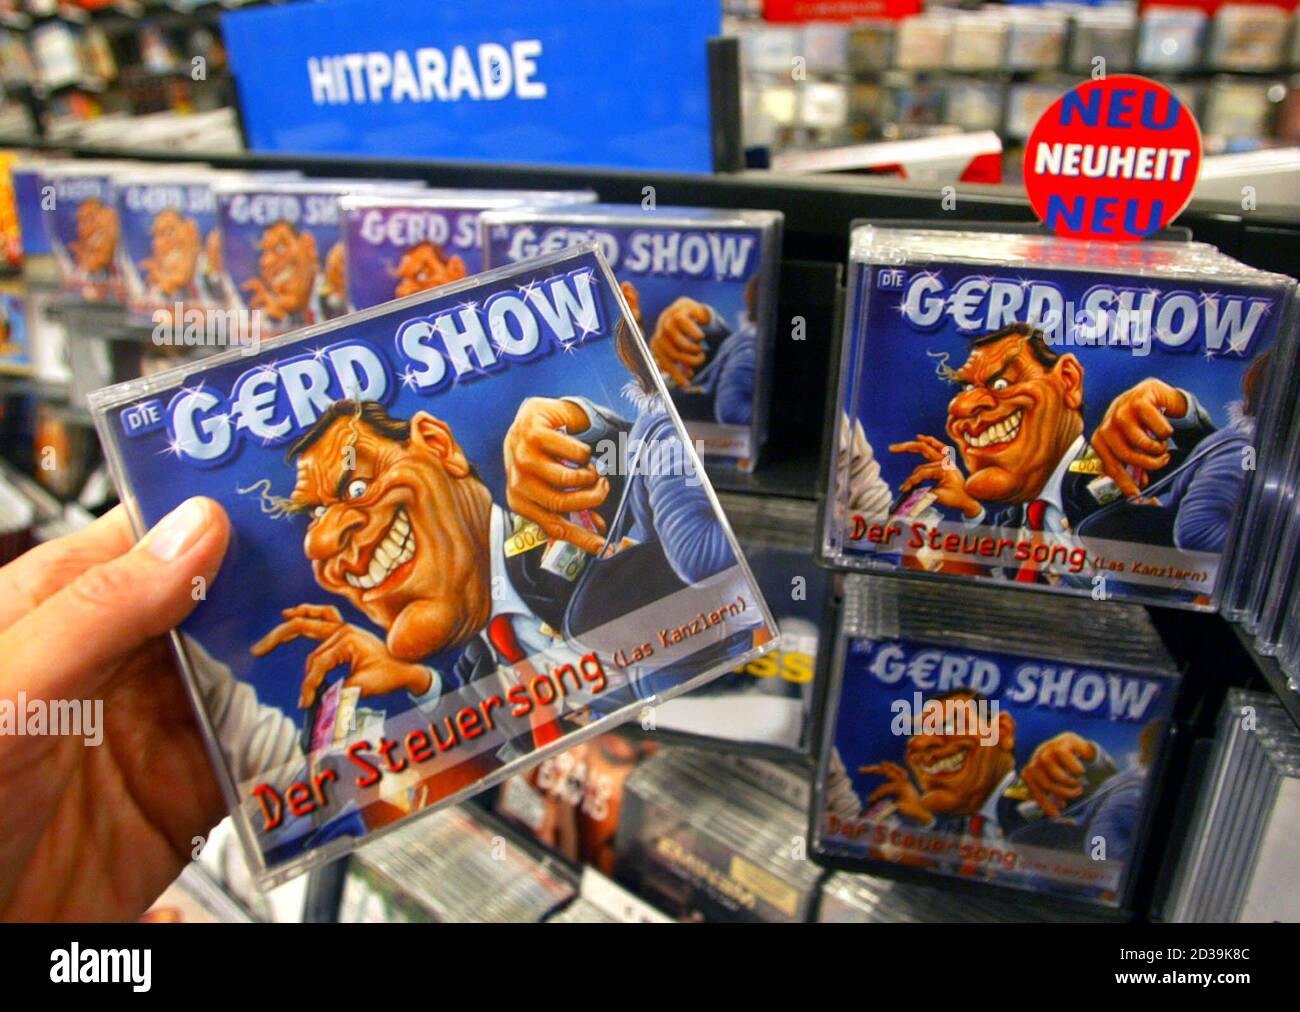 A woman holds a "Der Steuersong" CD by German mimic Elmar Brandt in a music  shop in Hamburg November 20, 2002. Schroeder has had little to smile about  lately due to public